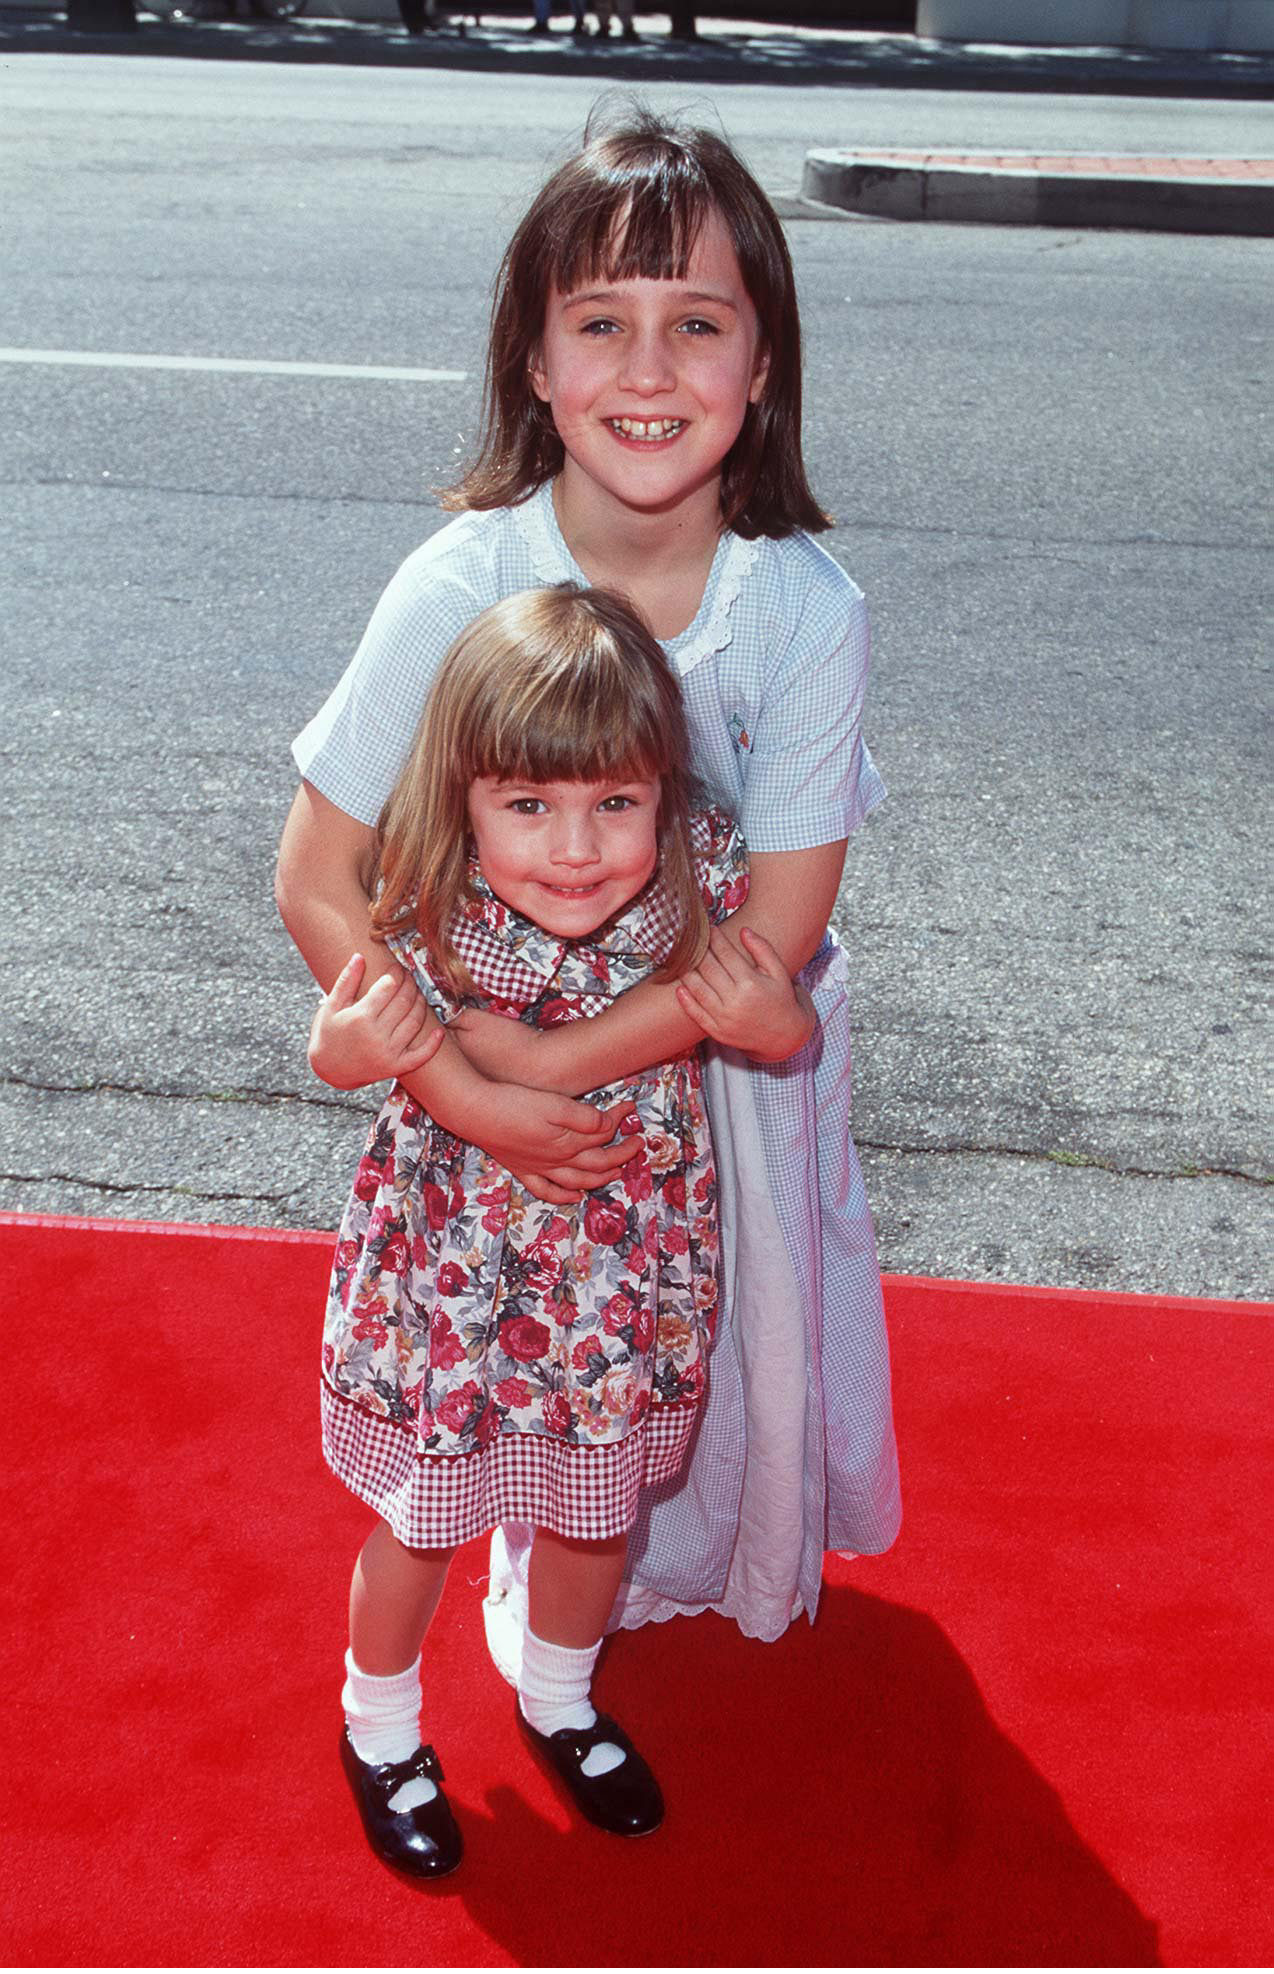 Mara Wilson and her sister, Ana, at the "Matilda" premiere in 1996 | Source: Getty Images